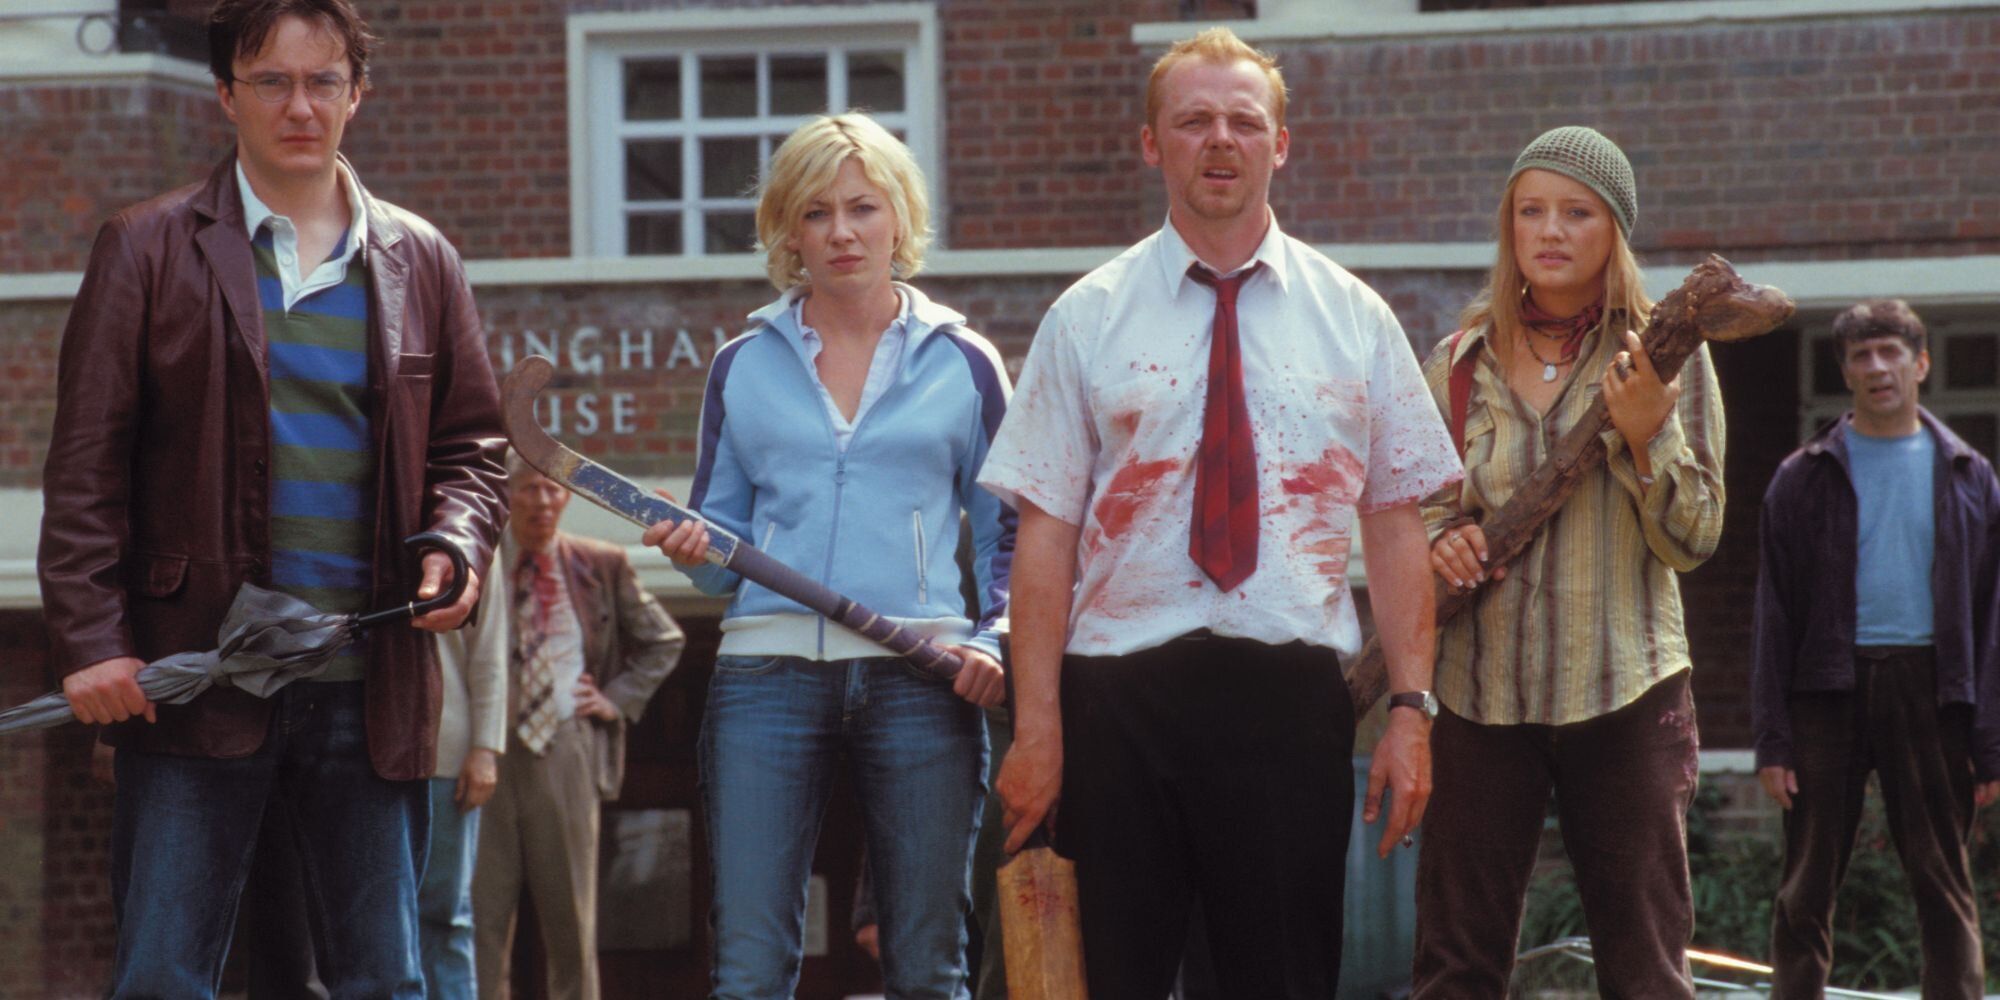 Kate Ashfield, Simon Pegg, and Lucy Davis in the film Shaun of the Dead